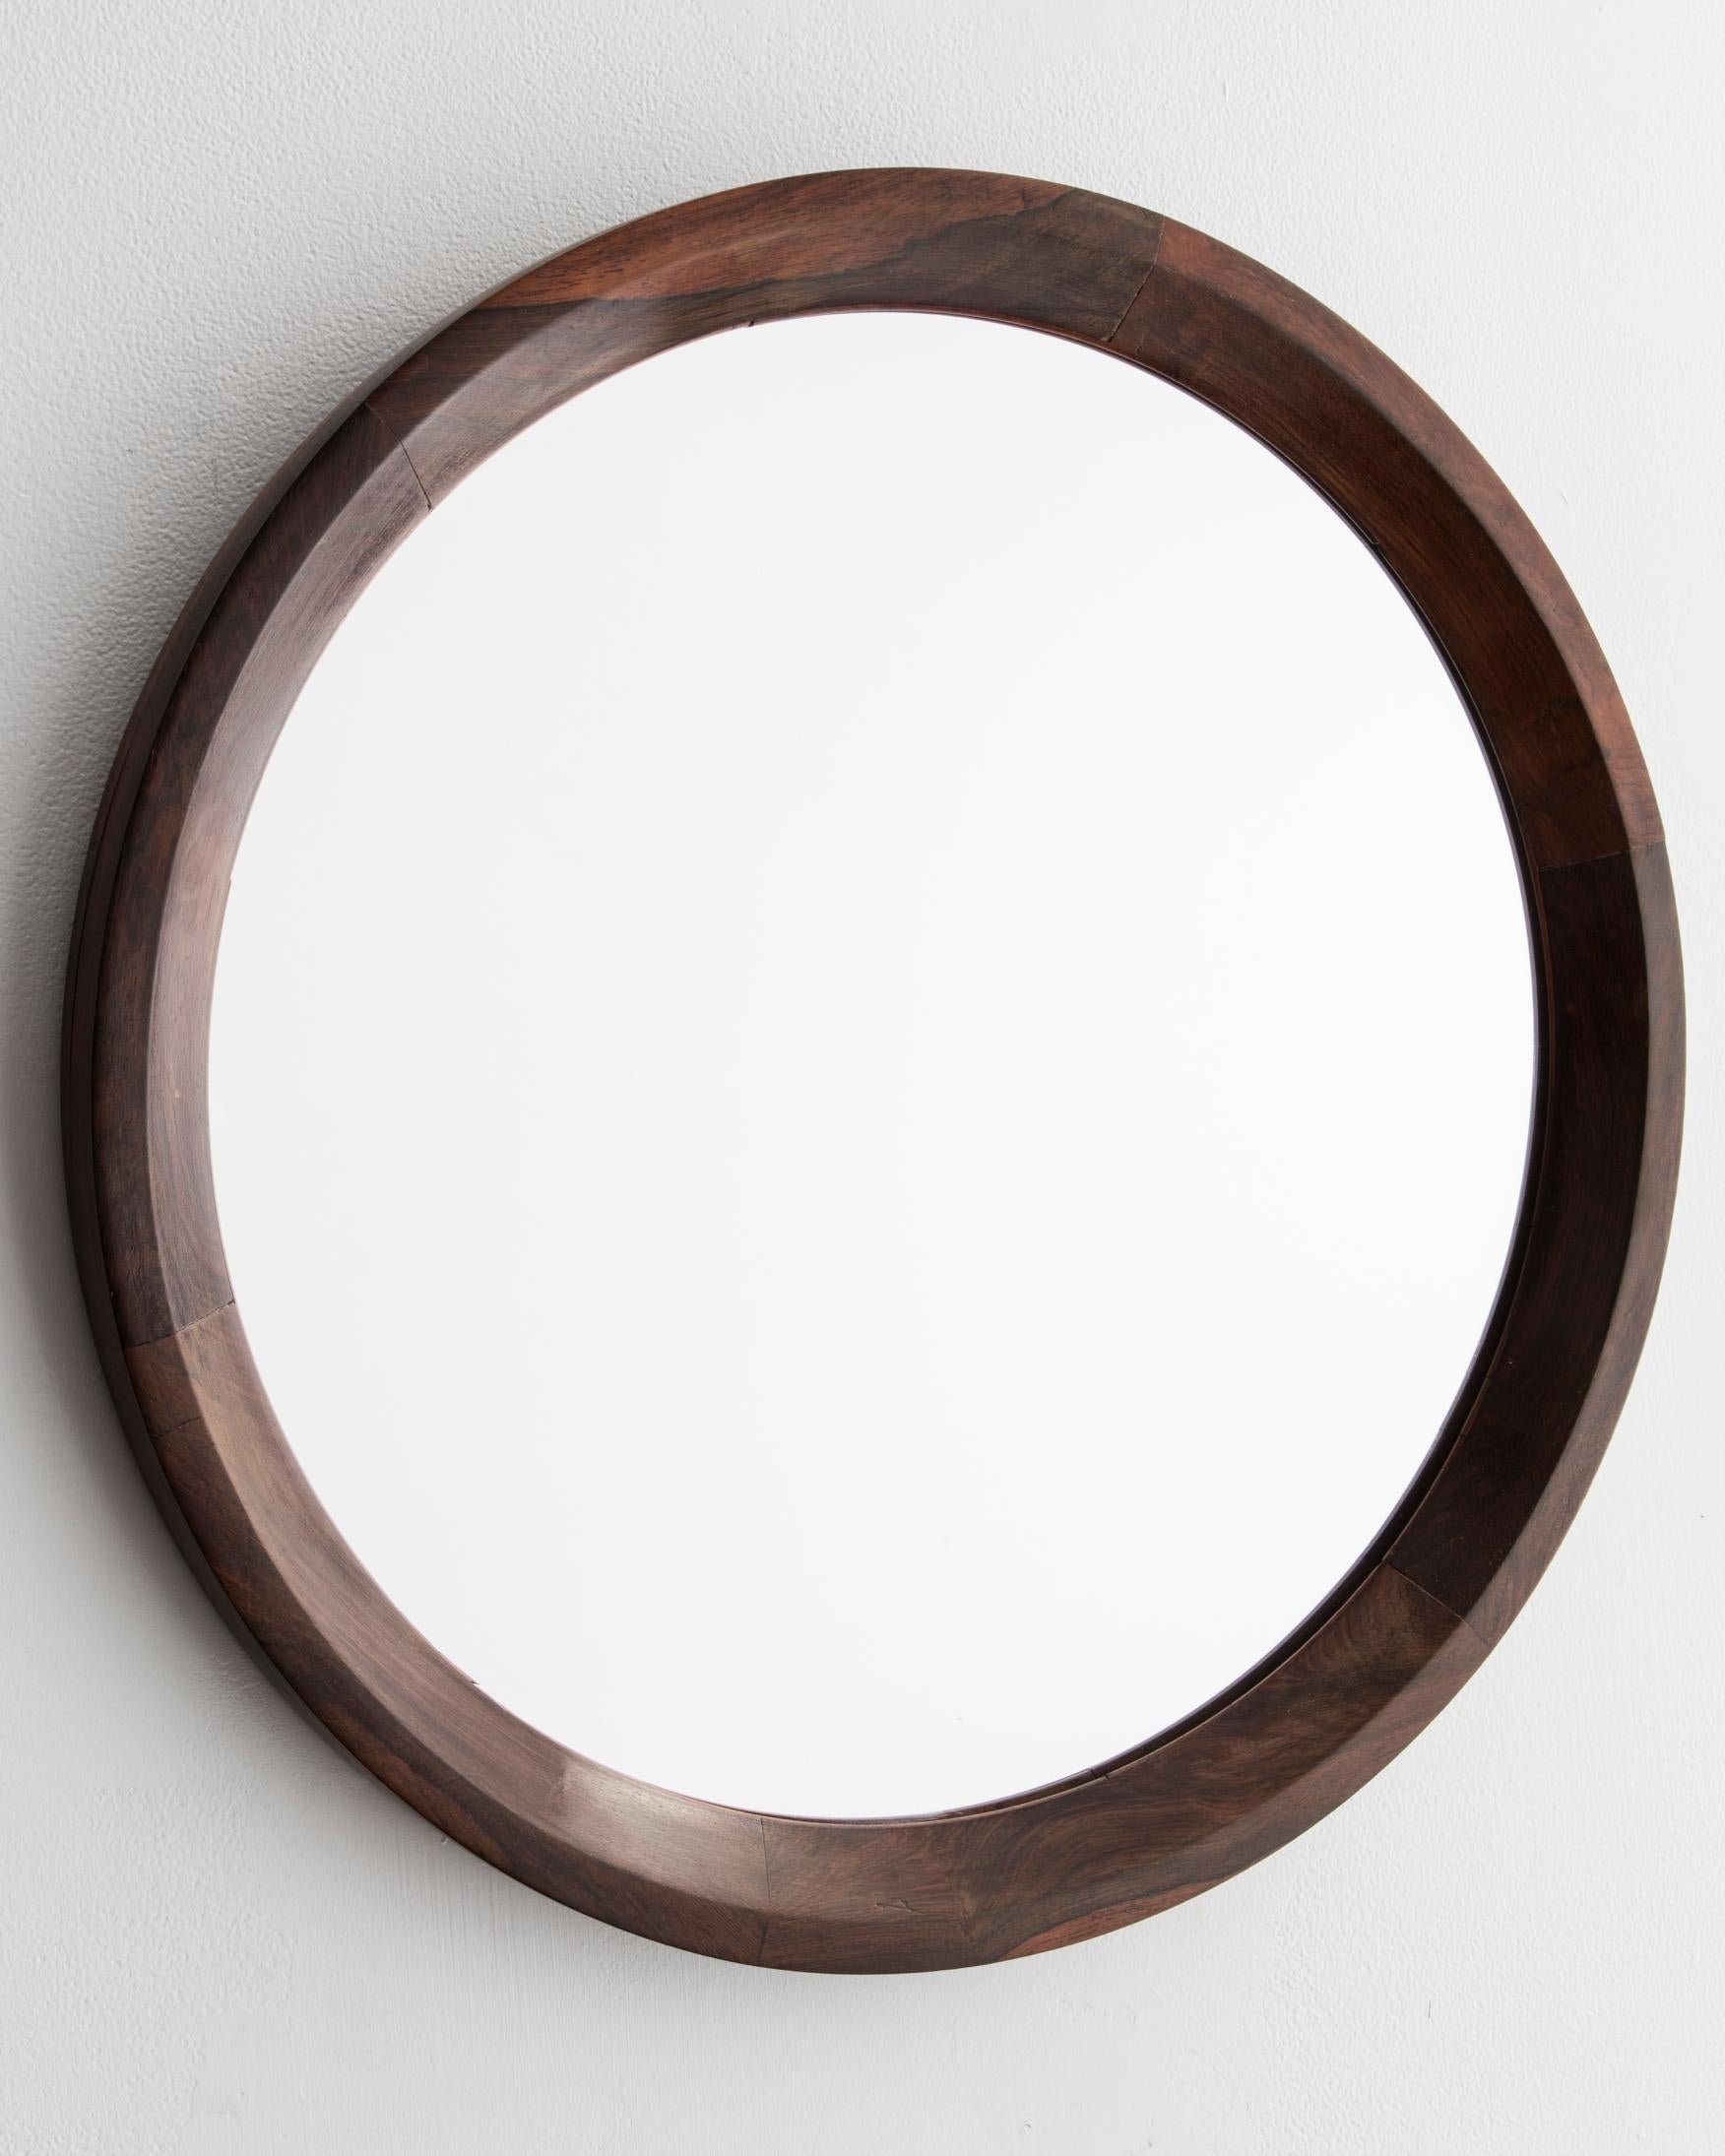 Round Grasselli mirror with wood frame. Designed by Sergio Rodrigues, Brazil, circa 1960.
           